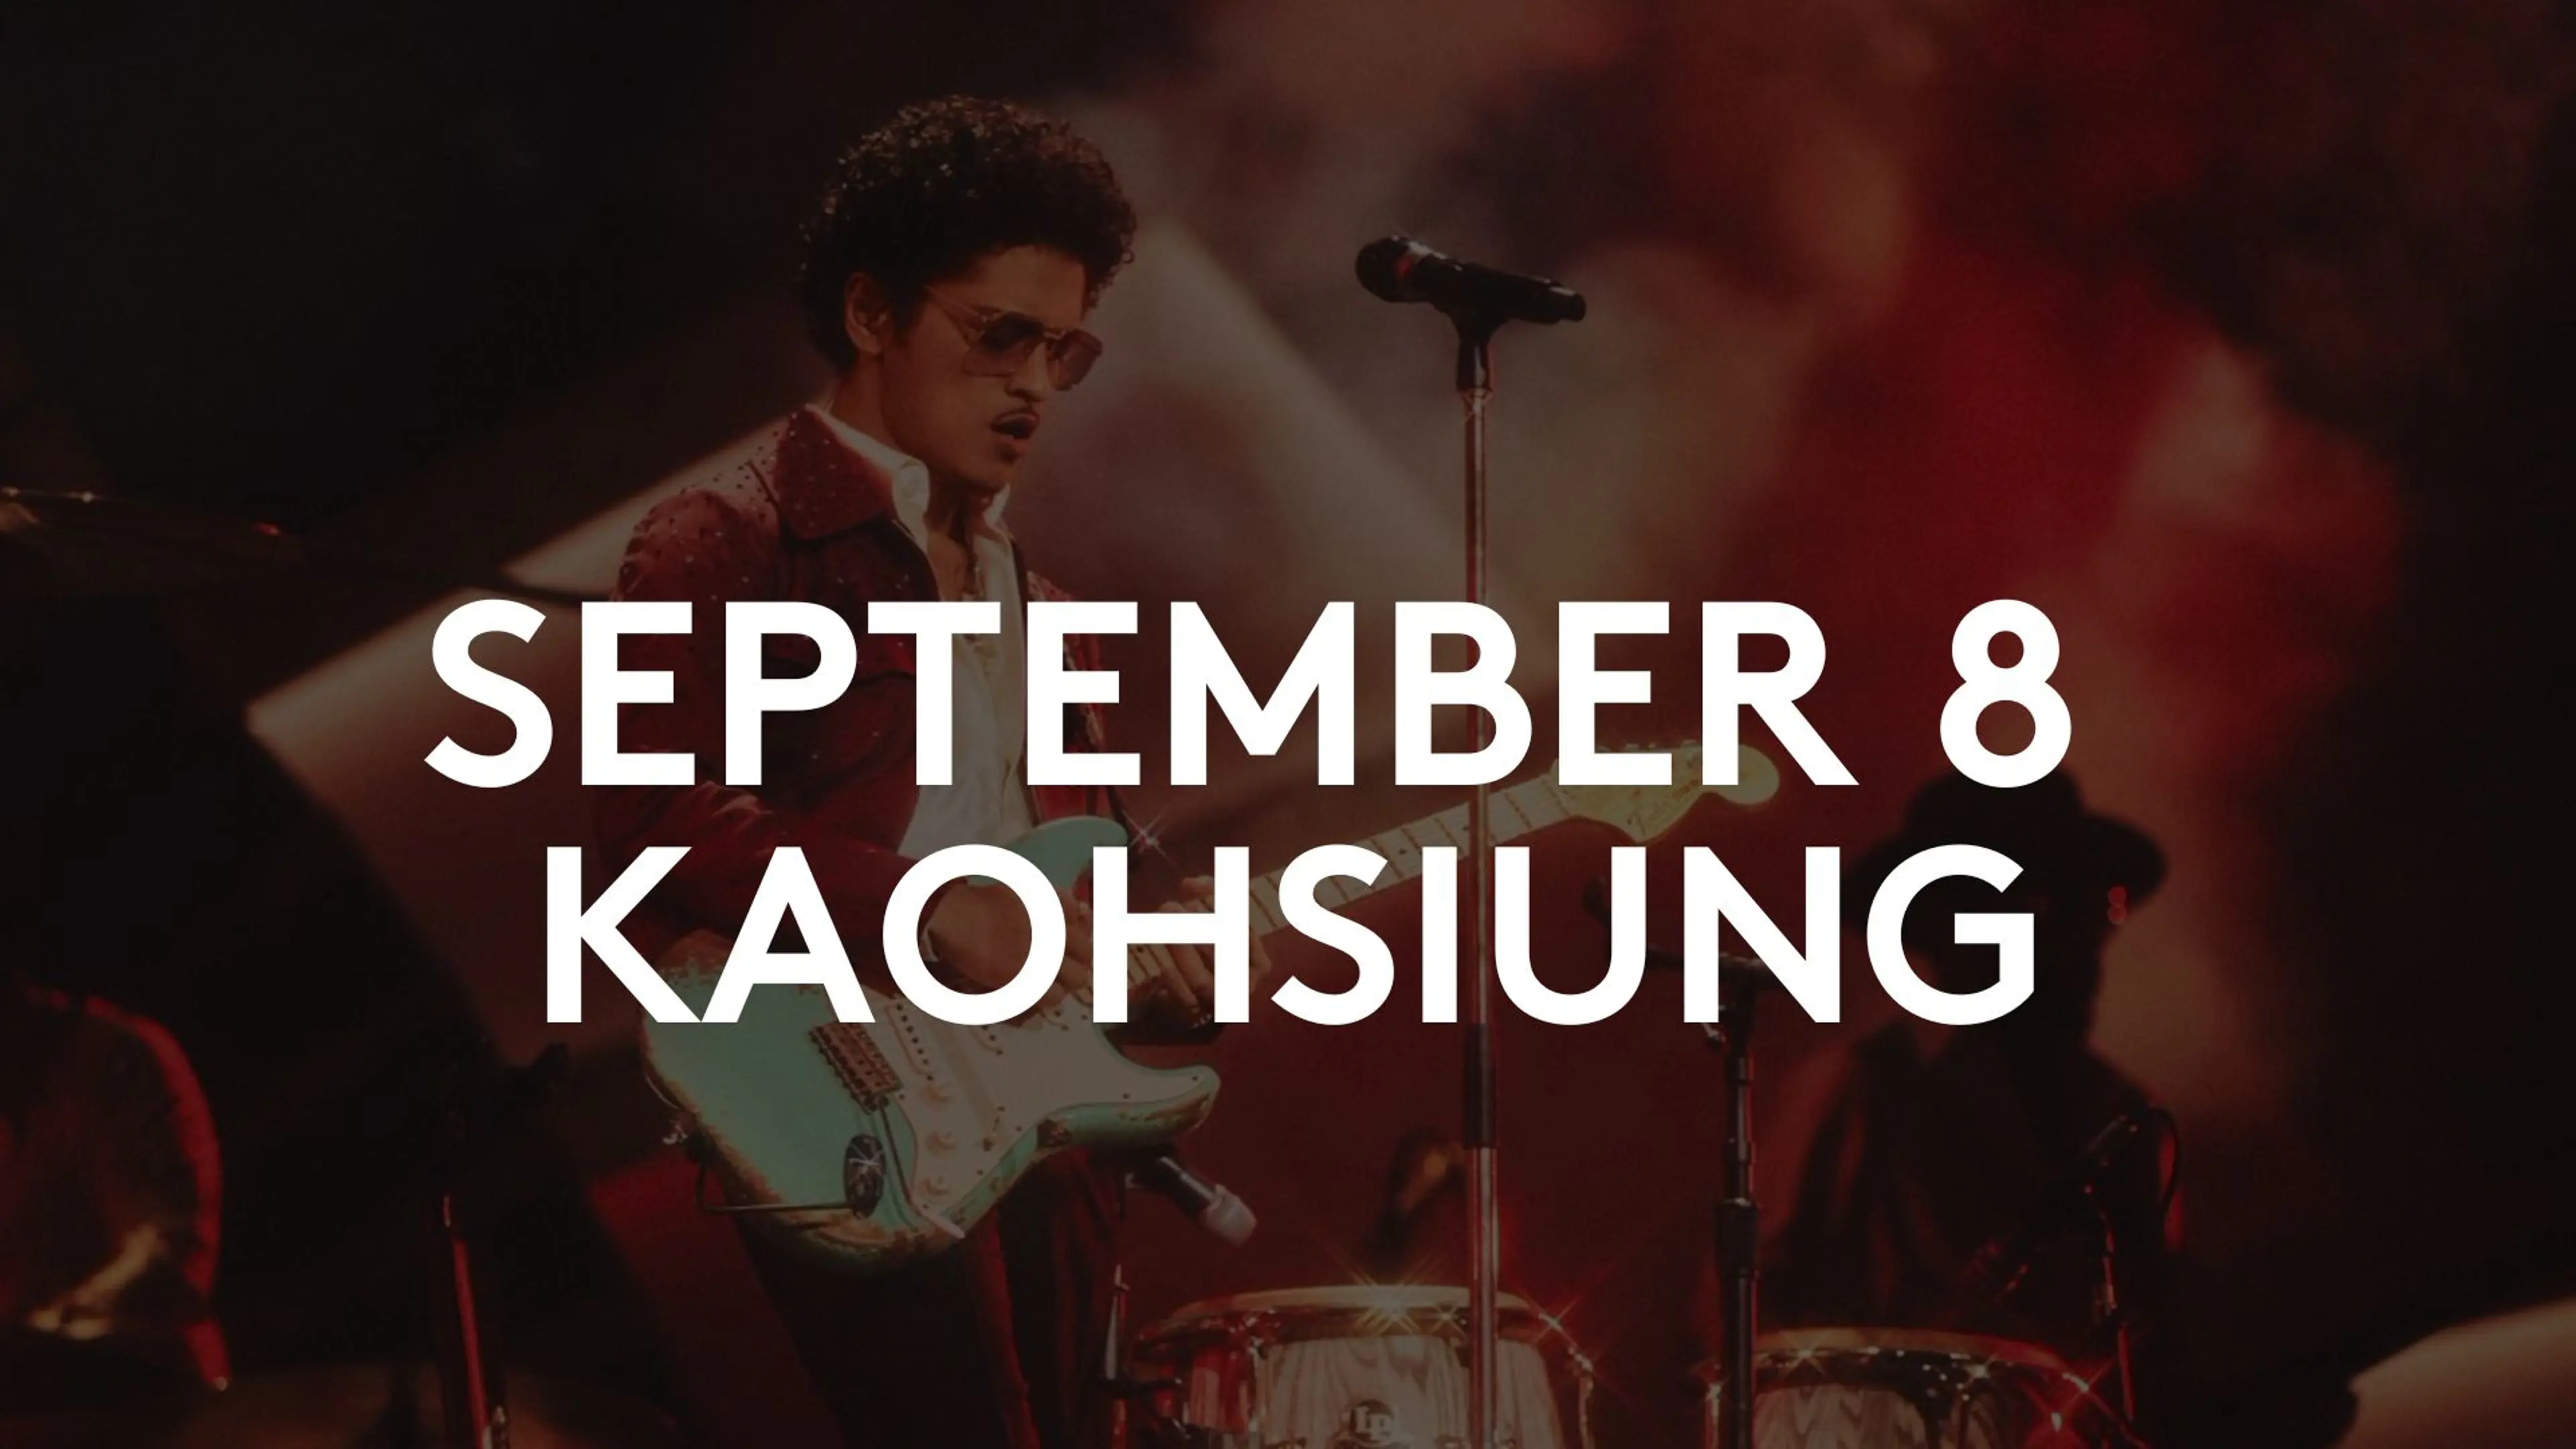 Bruno Mars Live In Kaohsiung